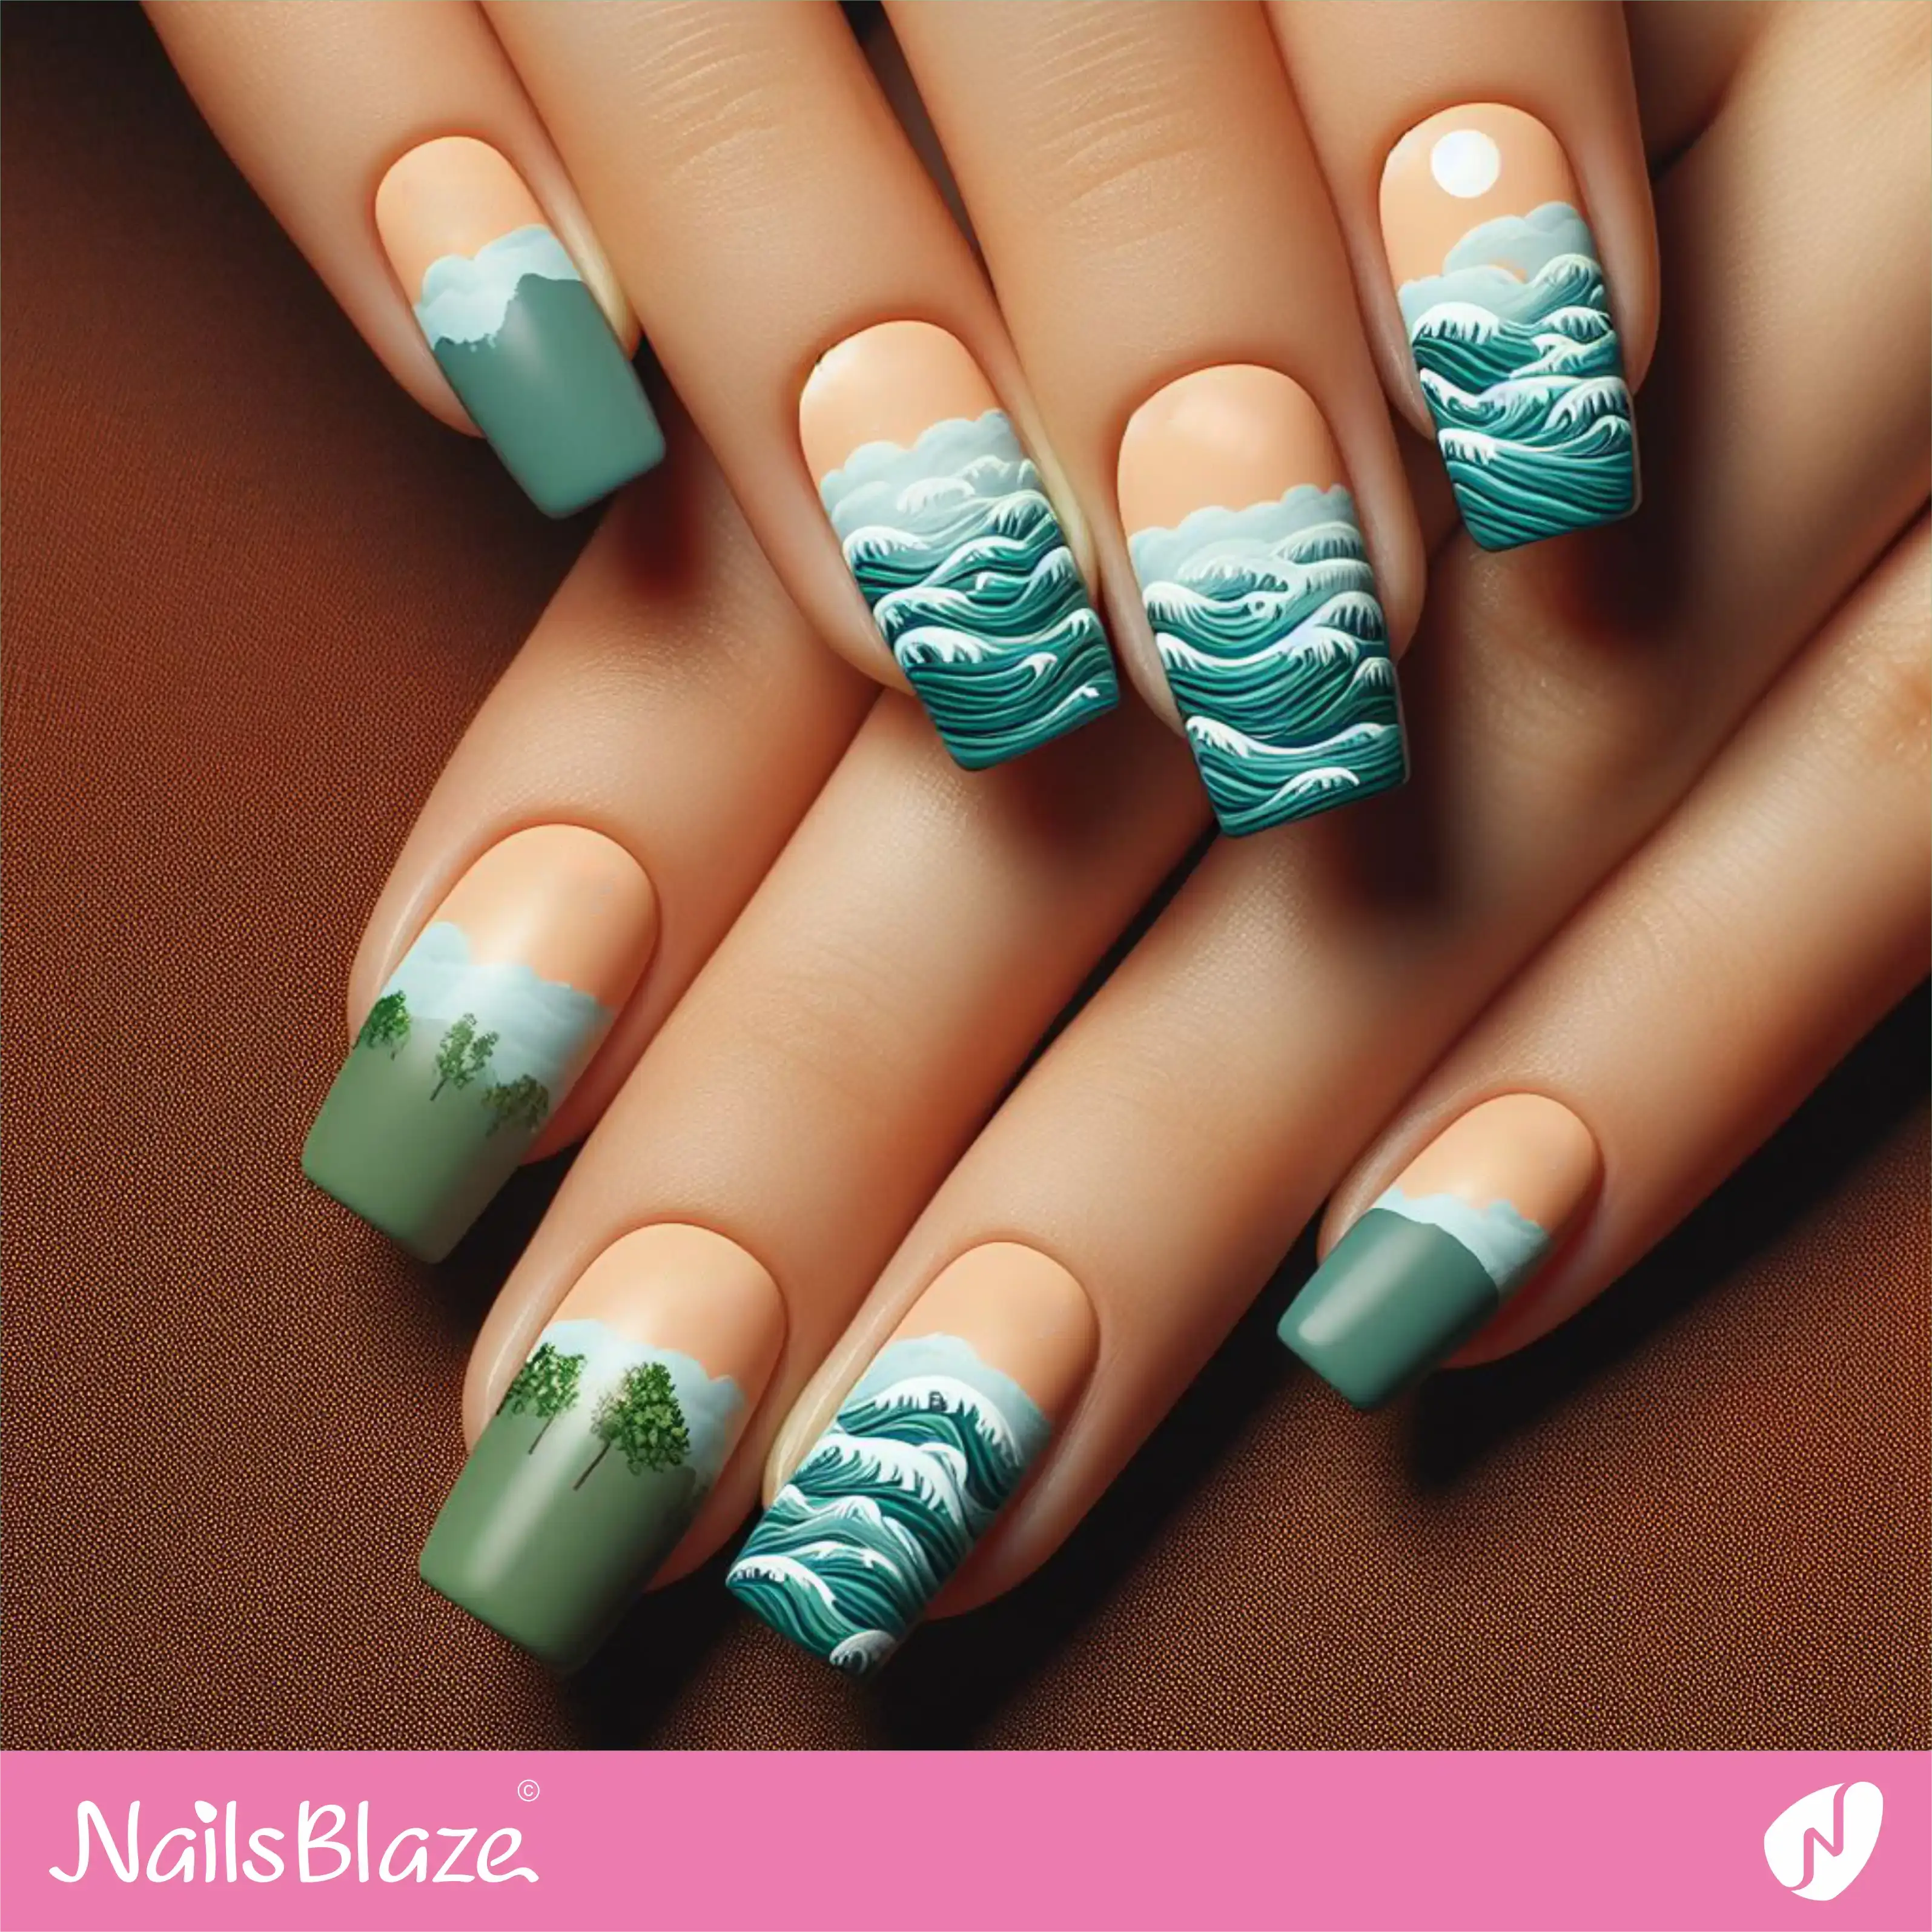 Green and Blue Nails with Ocean Waves | Save the Ocean Nails - NB3280